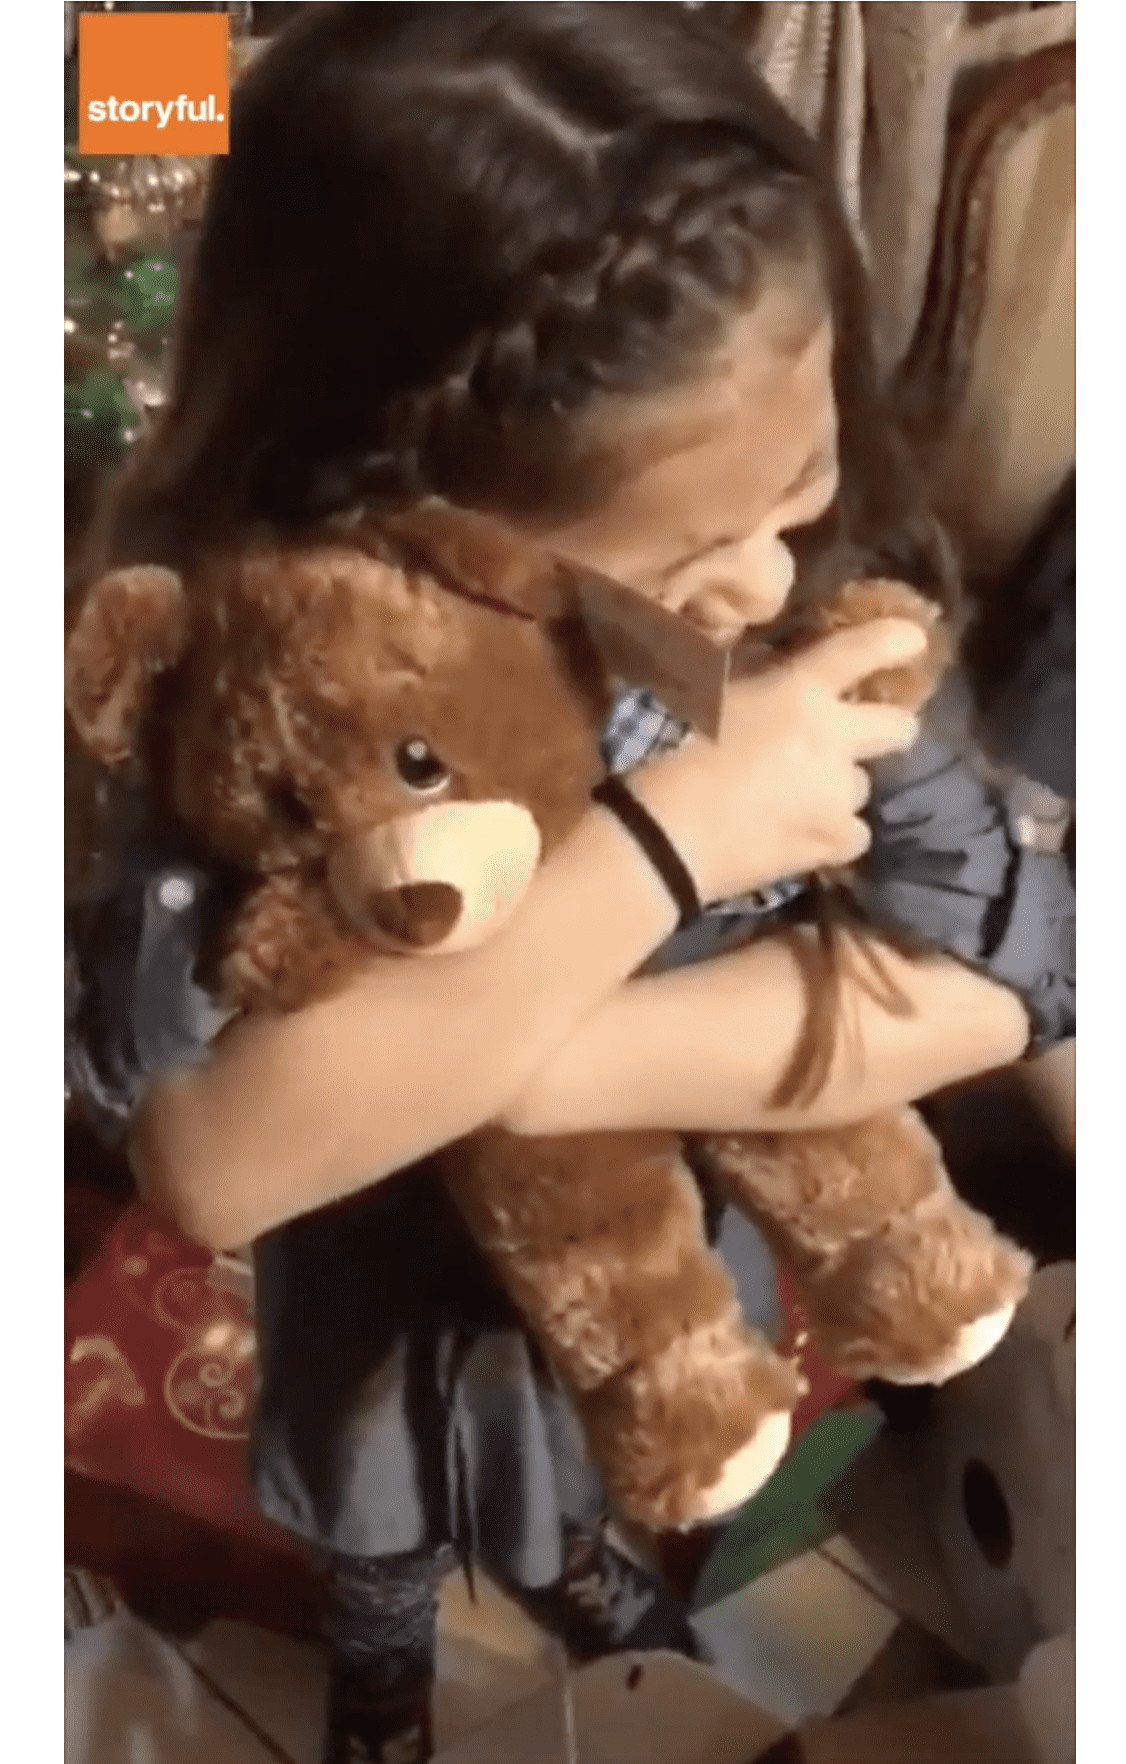 One of the sisters breaks down holding the teddy close to her chest. | Source: facebook.com/fox26houston